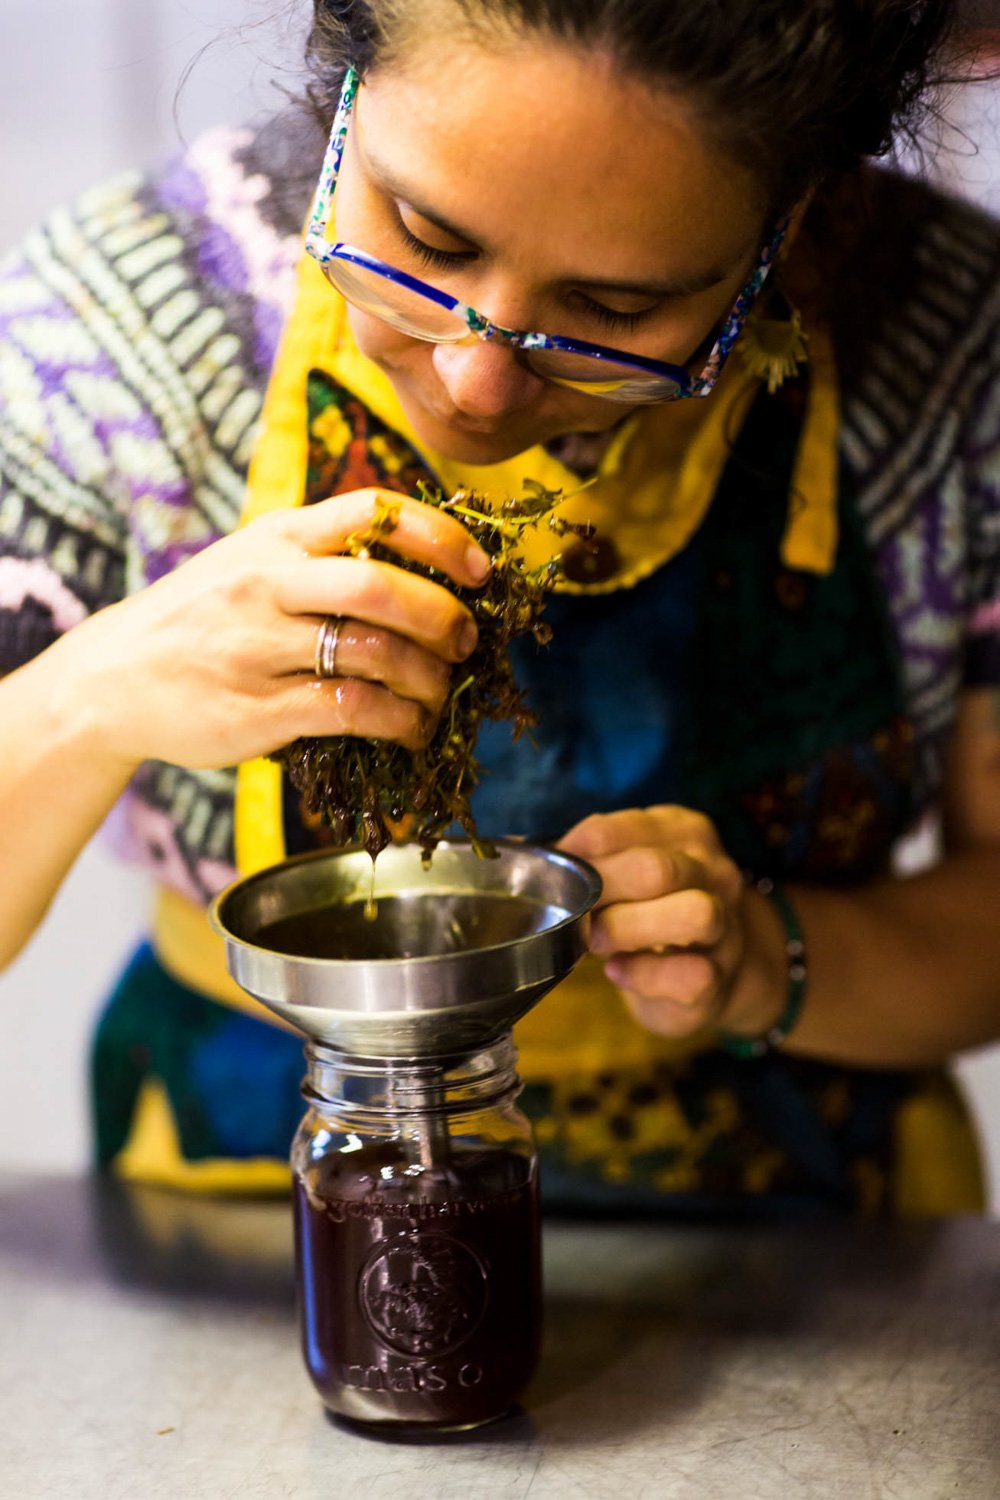  Artisan Celia Jimenez from Cucamanga checks an infusion of St John's Wort at her home studio in the Laurentians. 